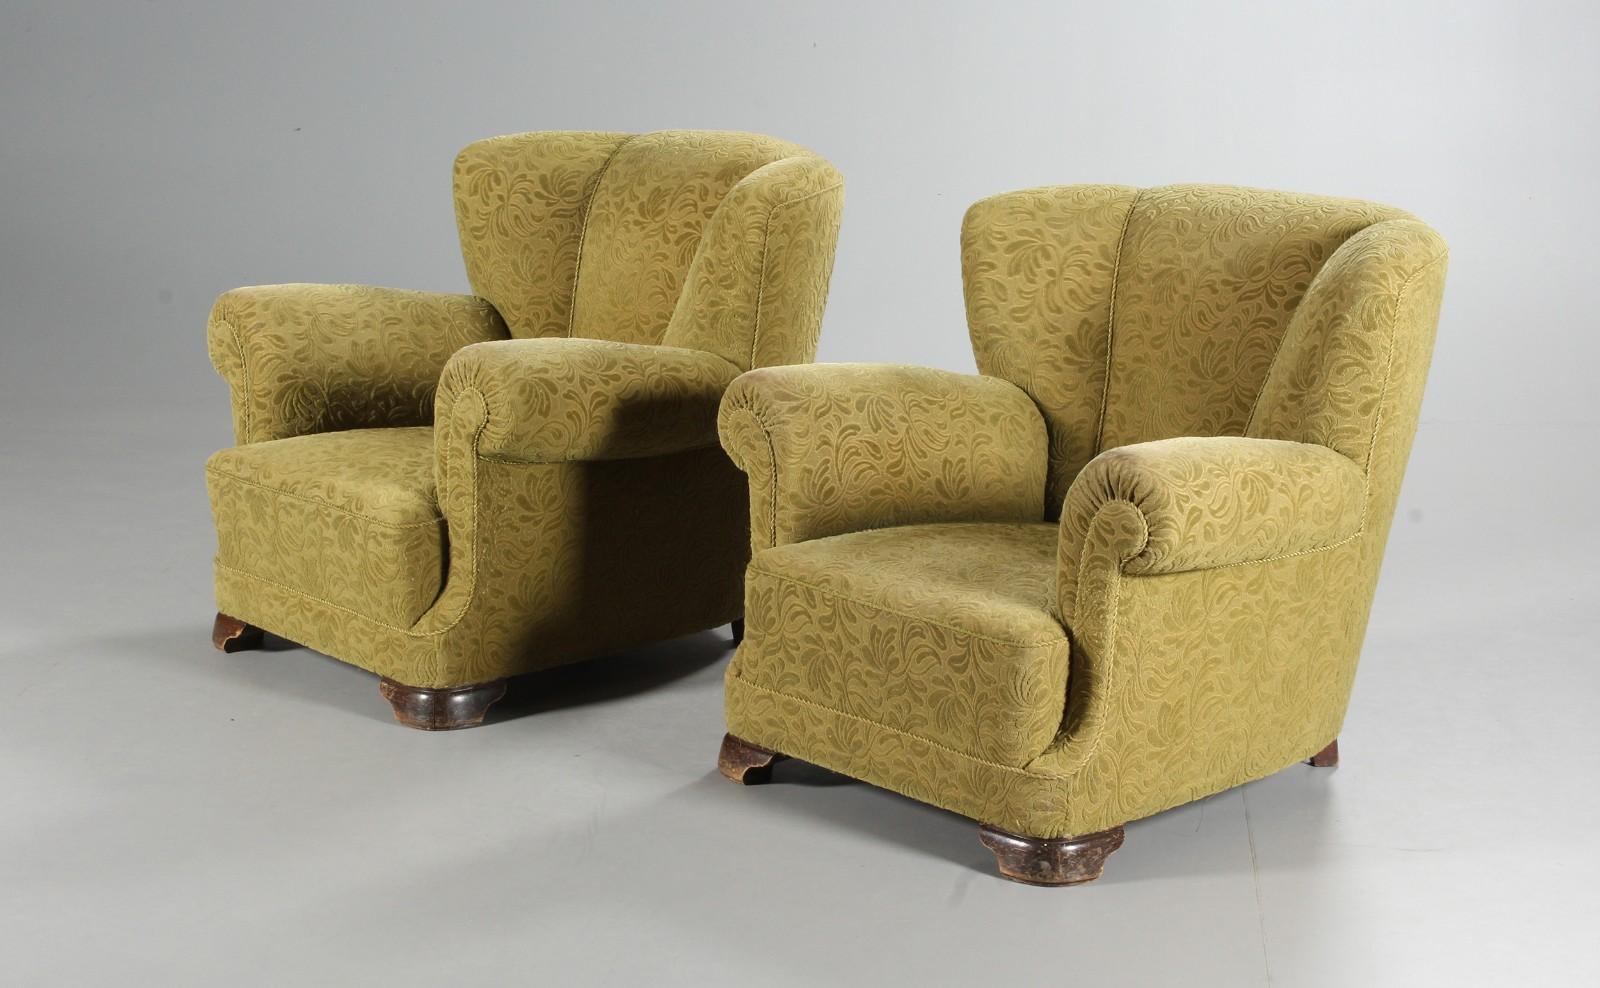 Pair of sublime large scale club chairs very similar to Fritz Hansen's famous model 1518 and likely made in the late 1930's or early 1940s judging from the leg design. The chairs are unmarked and we are not aware of the Designer /Maker. Raised on